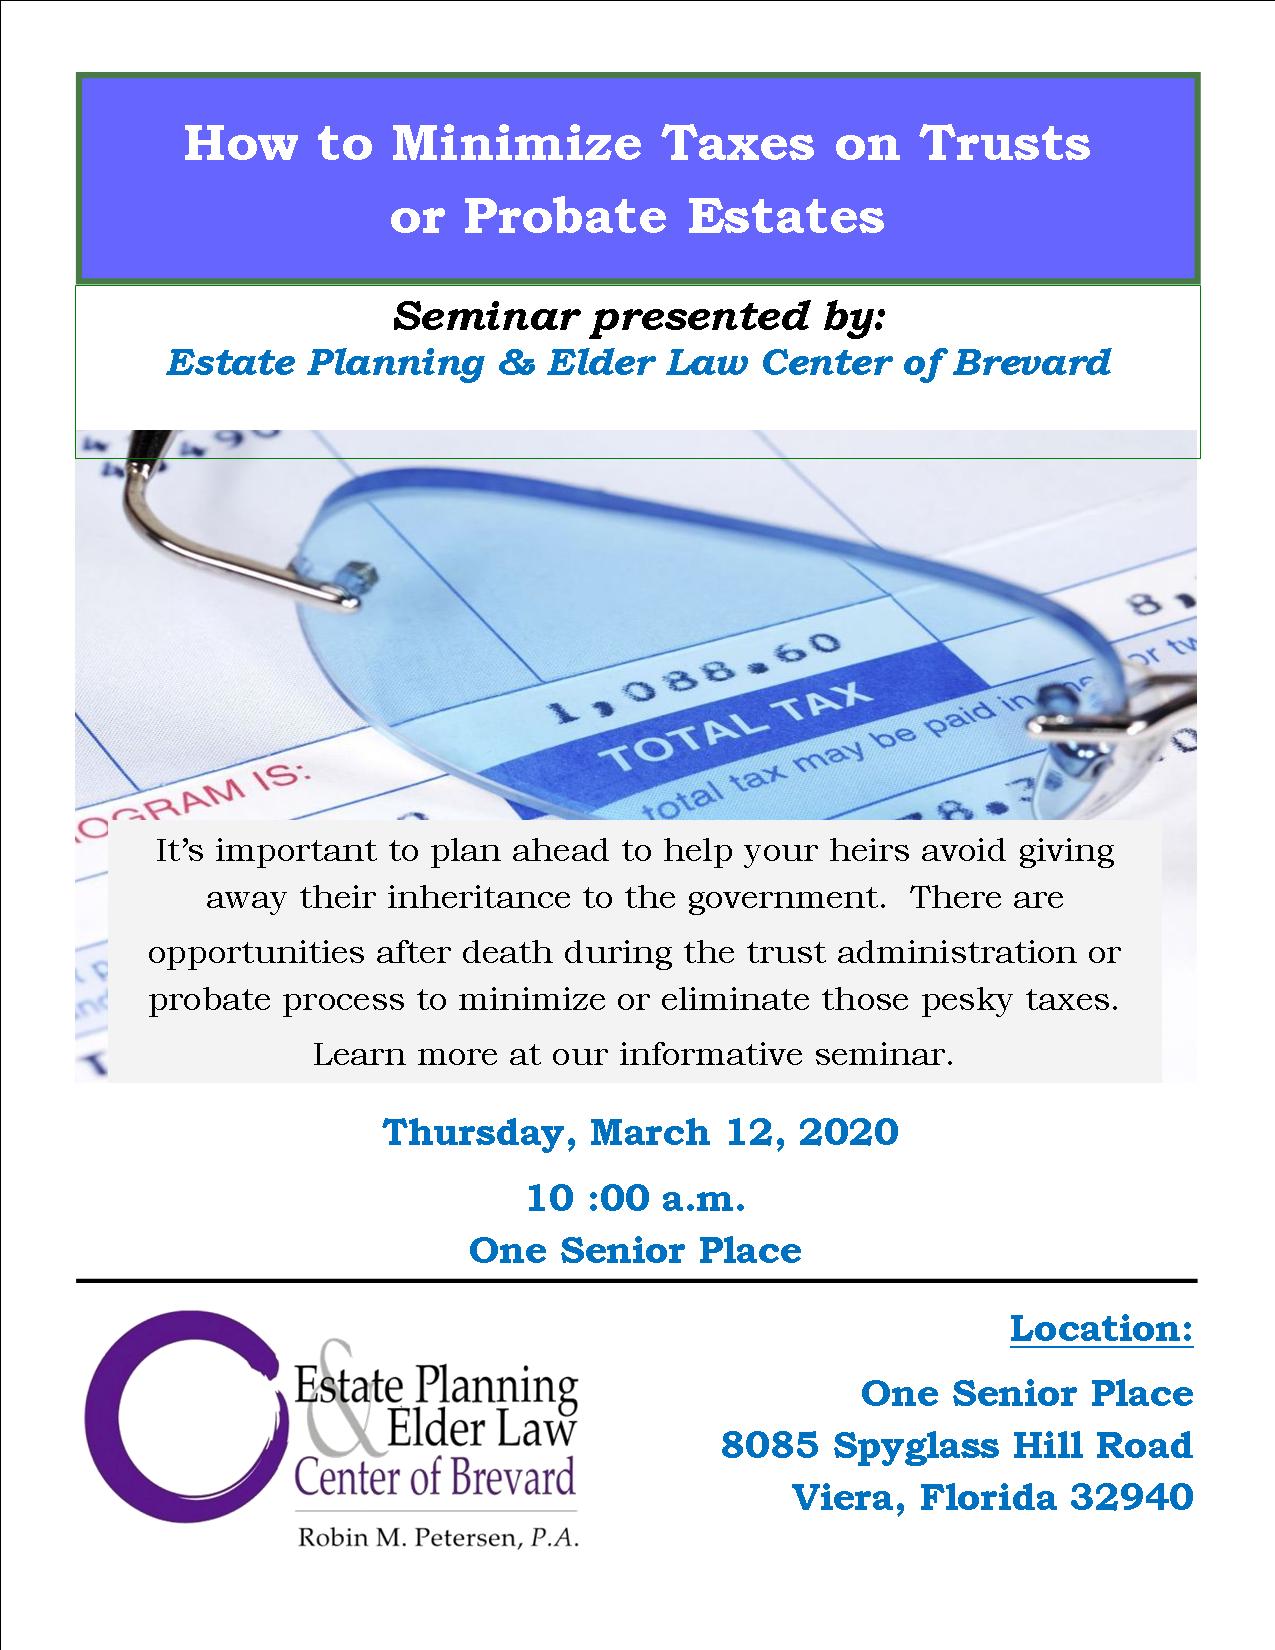 How to Minimize Taxes on Trusts or Probate Estates Presented by Estate Planning and Elder Law Center of Brevard